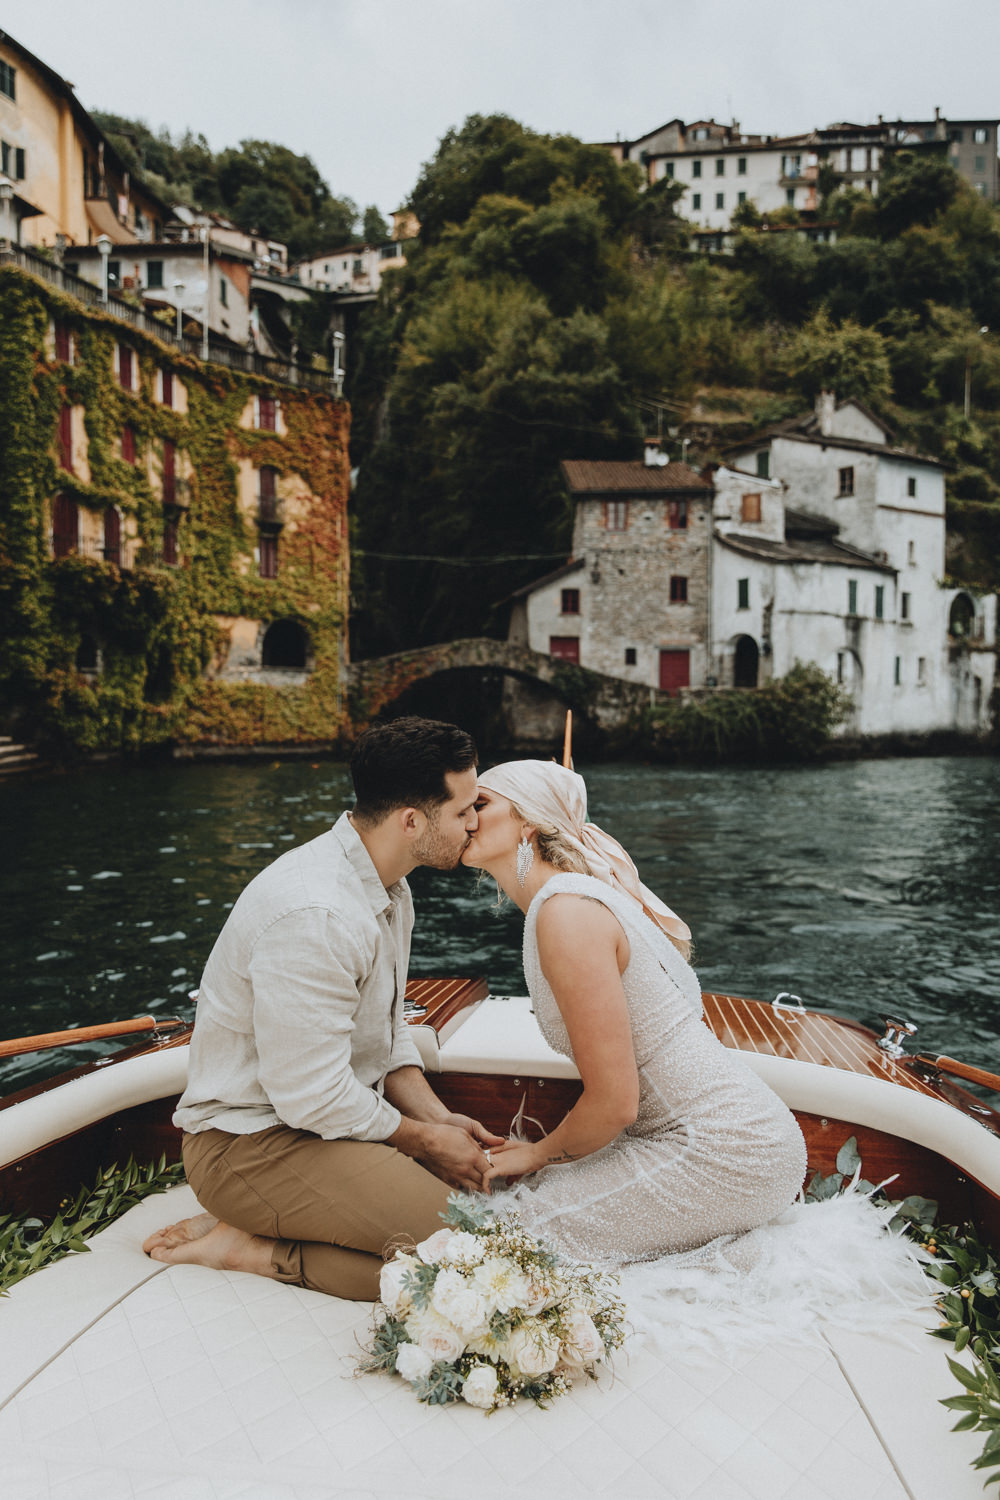 A couple kisses on the back of a wooden boat on lake Como during their elopement day abroad. The water is a deep blue and there are old Italian buildings and a waterfall on the land behind them.